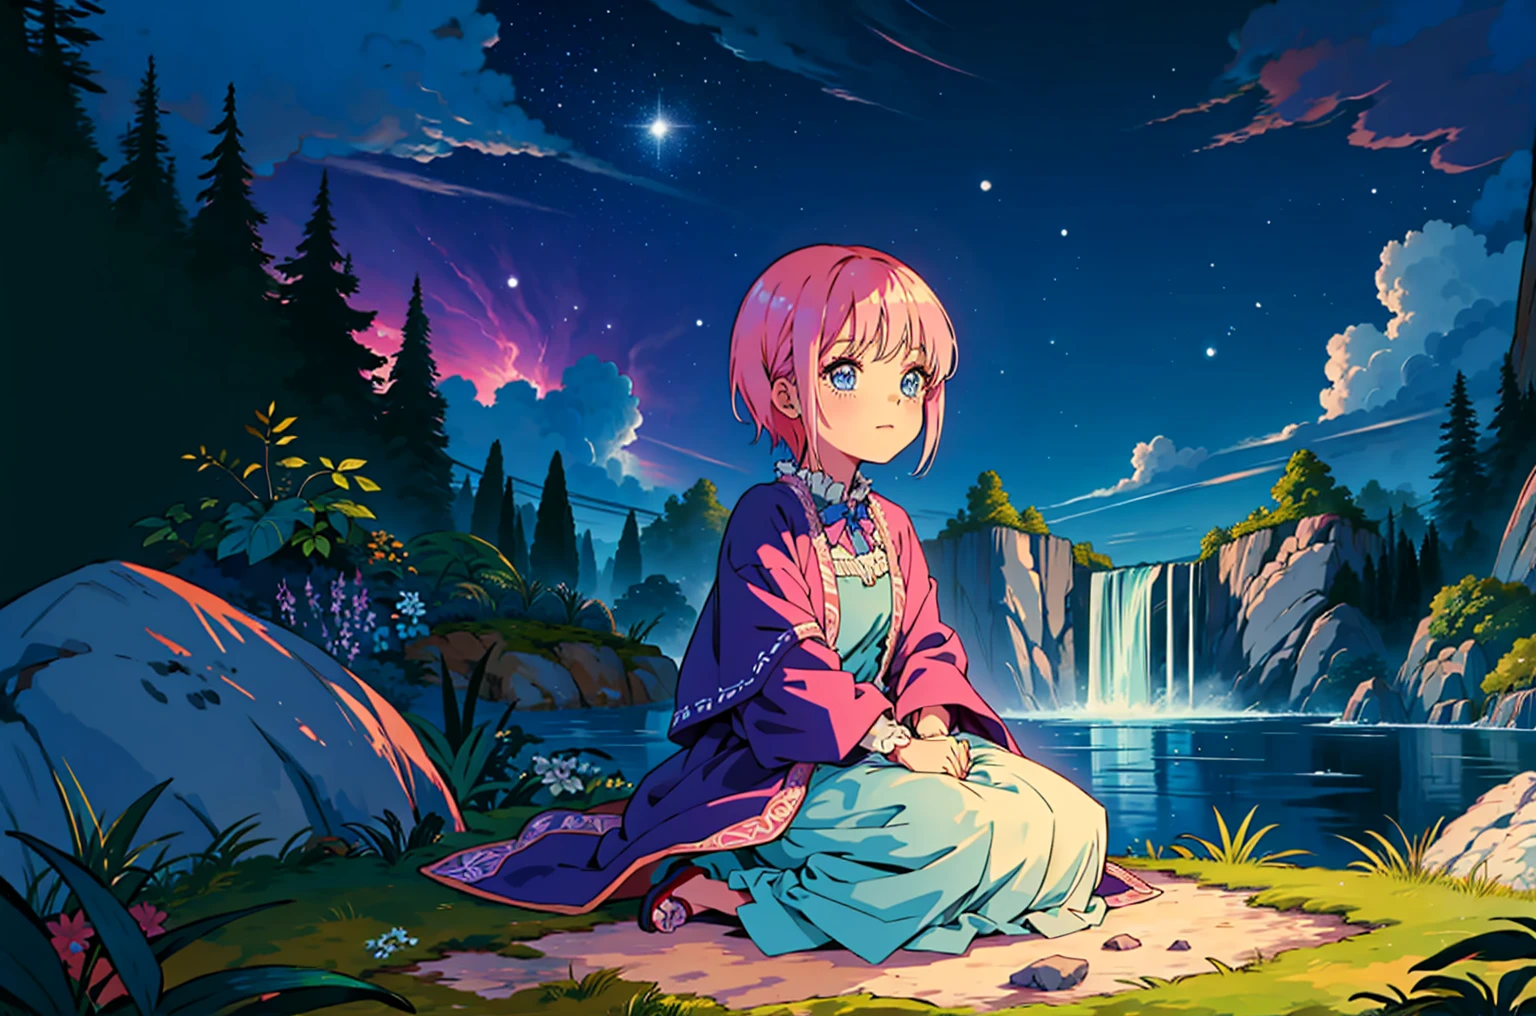 Scenery, light blue sky, 1girl, ichika sitting in the waterfalls, cloud, sitting on rocks in the middle of the waterfall, magical photography, ultra-detailed, 4k, Depth of field, High-resolution, outdoors, starry night sky, starts made of iridescent tears, pastel aesthetic colors, sfw, nakano_ichika, aaichika, Nakano ichika sitting in the waterfall, short silky pink hair, masterpiece, 4k, ultradetailed, cowboy shot, nakano ichika, blue eyes, sparkling eyes, green bowtie, veiled pretty iridescent dress, minimal dress, attractive confident smile, happy, cute, Official art、Beautifully Aesthetic:1.2)、(a beauty girl:1.3)、vivid colours、colourful, Soft Light, Deep Focus Bokeh, fantasy, galaxy, sparkling, splendid, colorful, dramatic lighting, intricate details, (1 girl, solo, alone), intricate details, sfw, nakano_ichika, sparkling eyes, laughing happily, crystal, fantasy, shimmering, sparkling, splendid, colorful, bright colours. fix her hands, studio lighting:1.2), ichika nakano, 